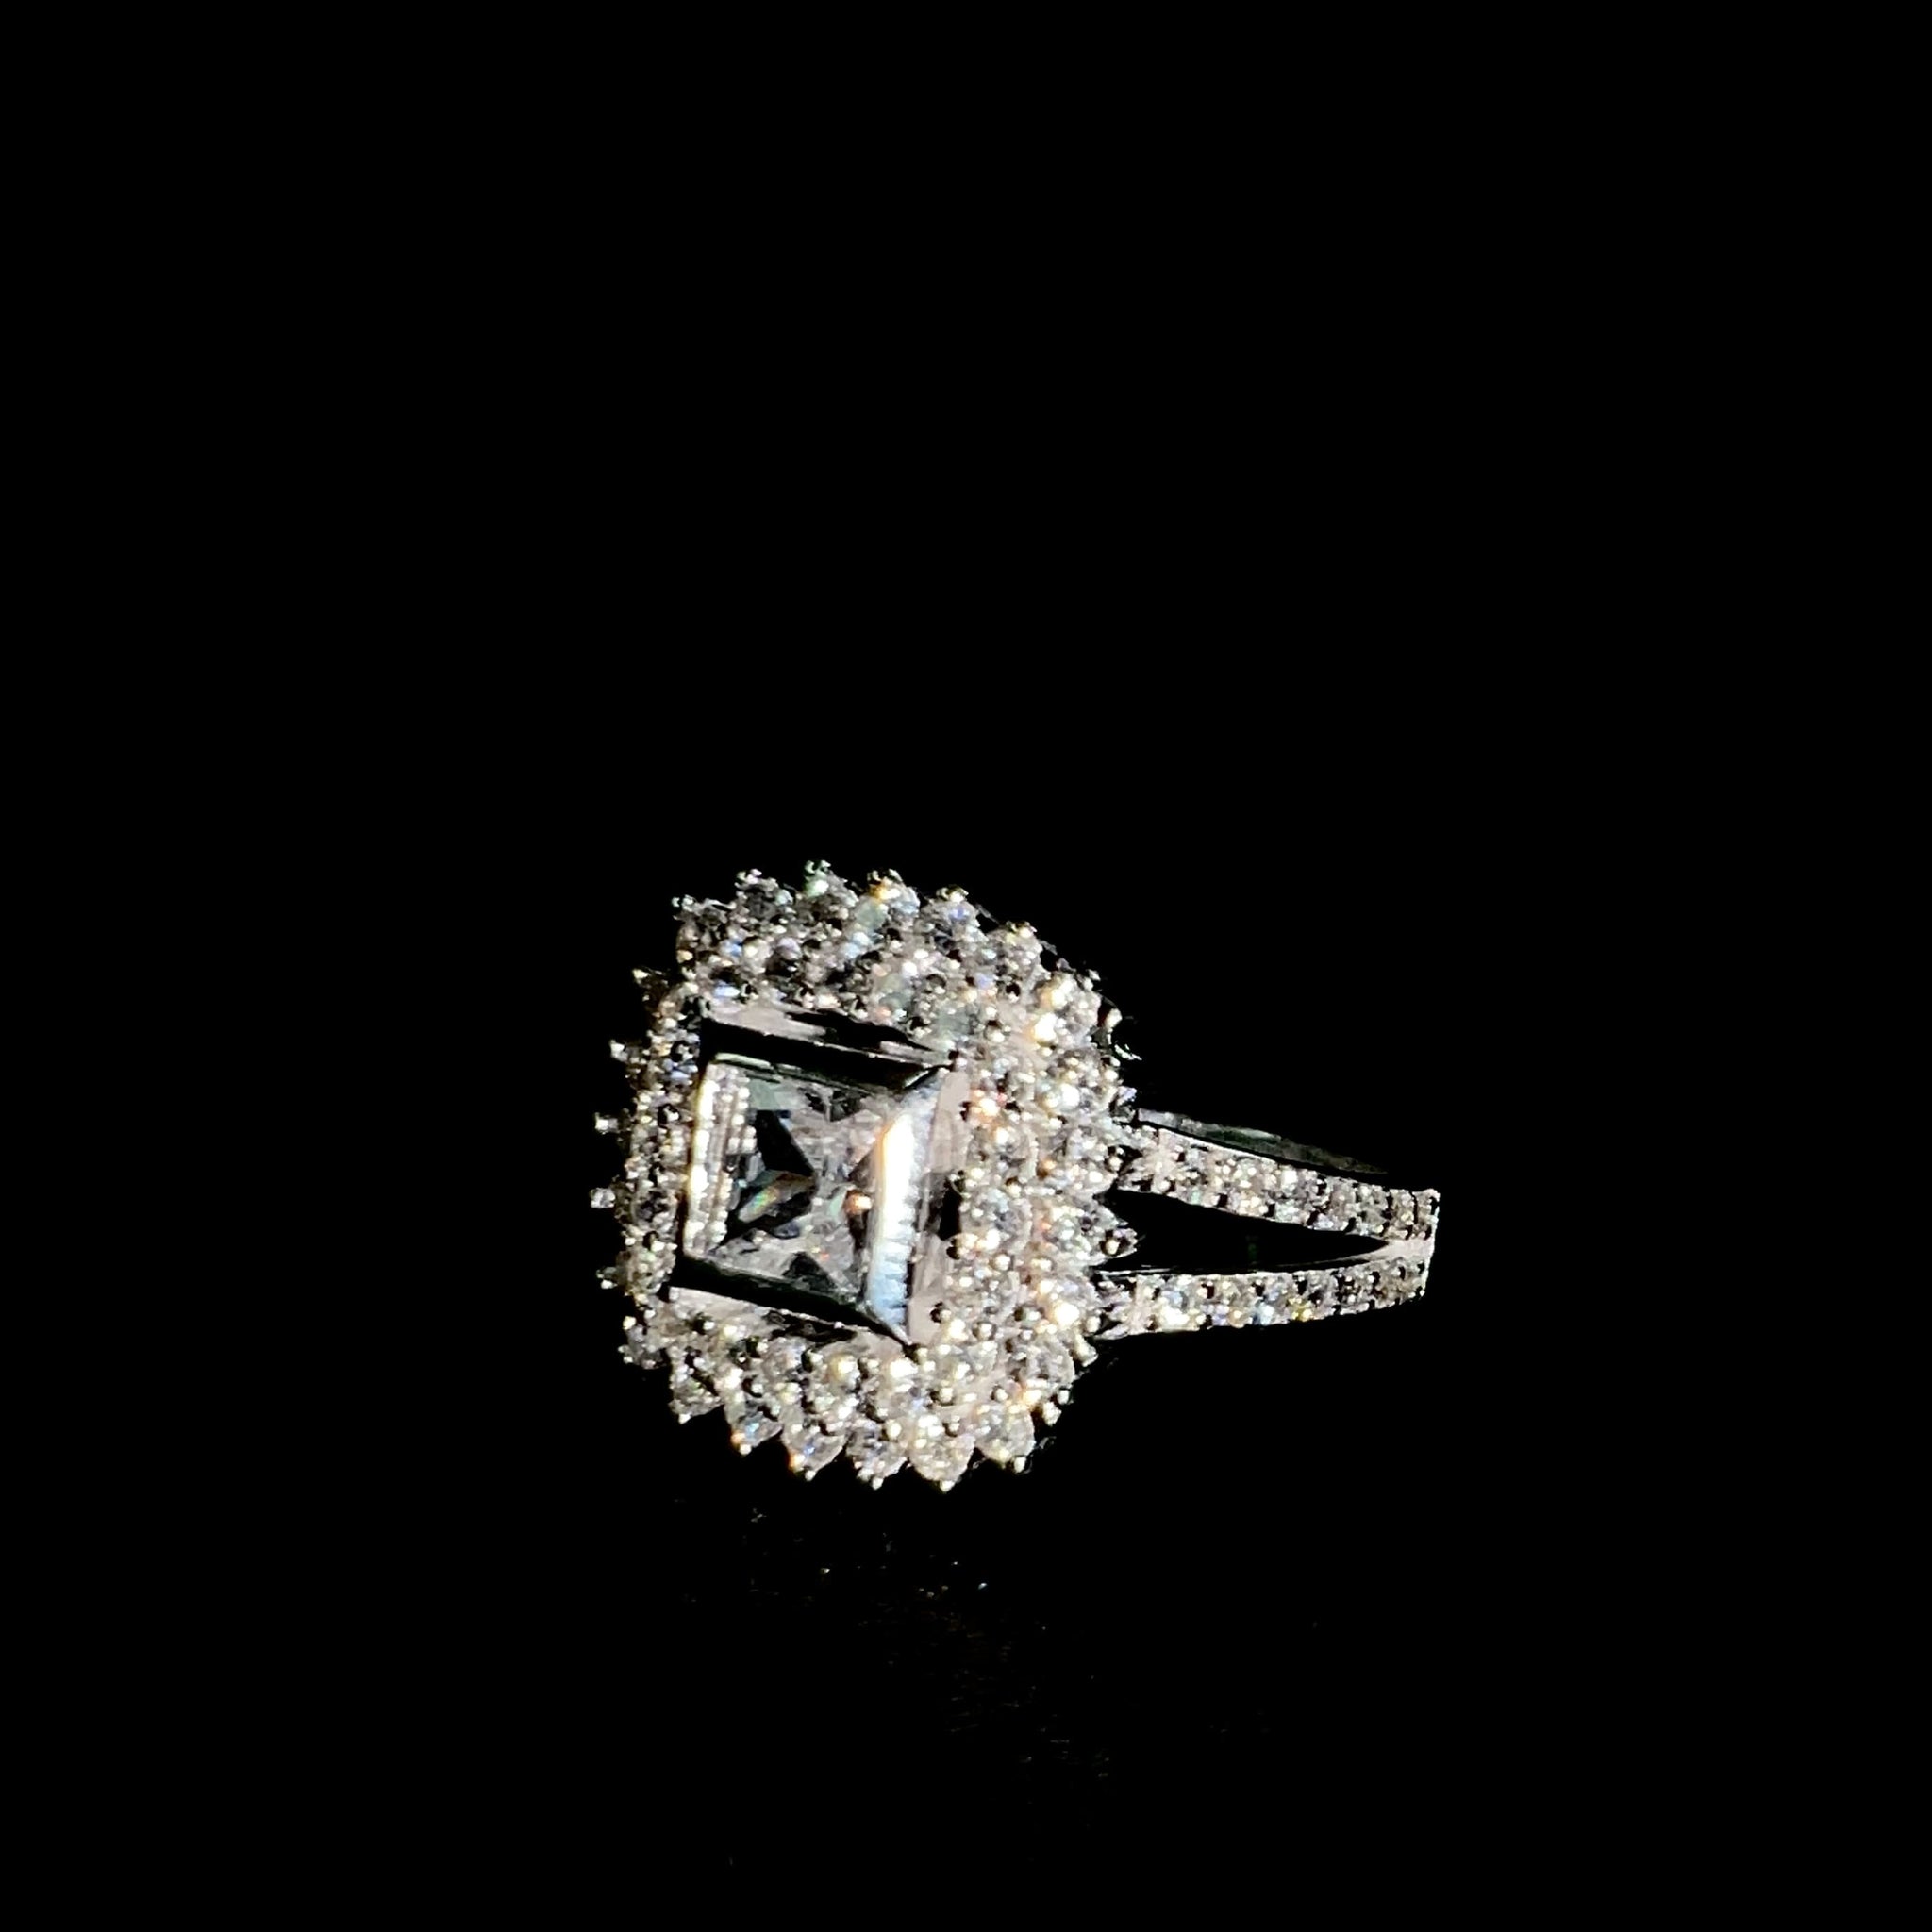 Iced Flower Ladies Ring - Silver 925 - Sehgal Dubai Collection